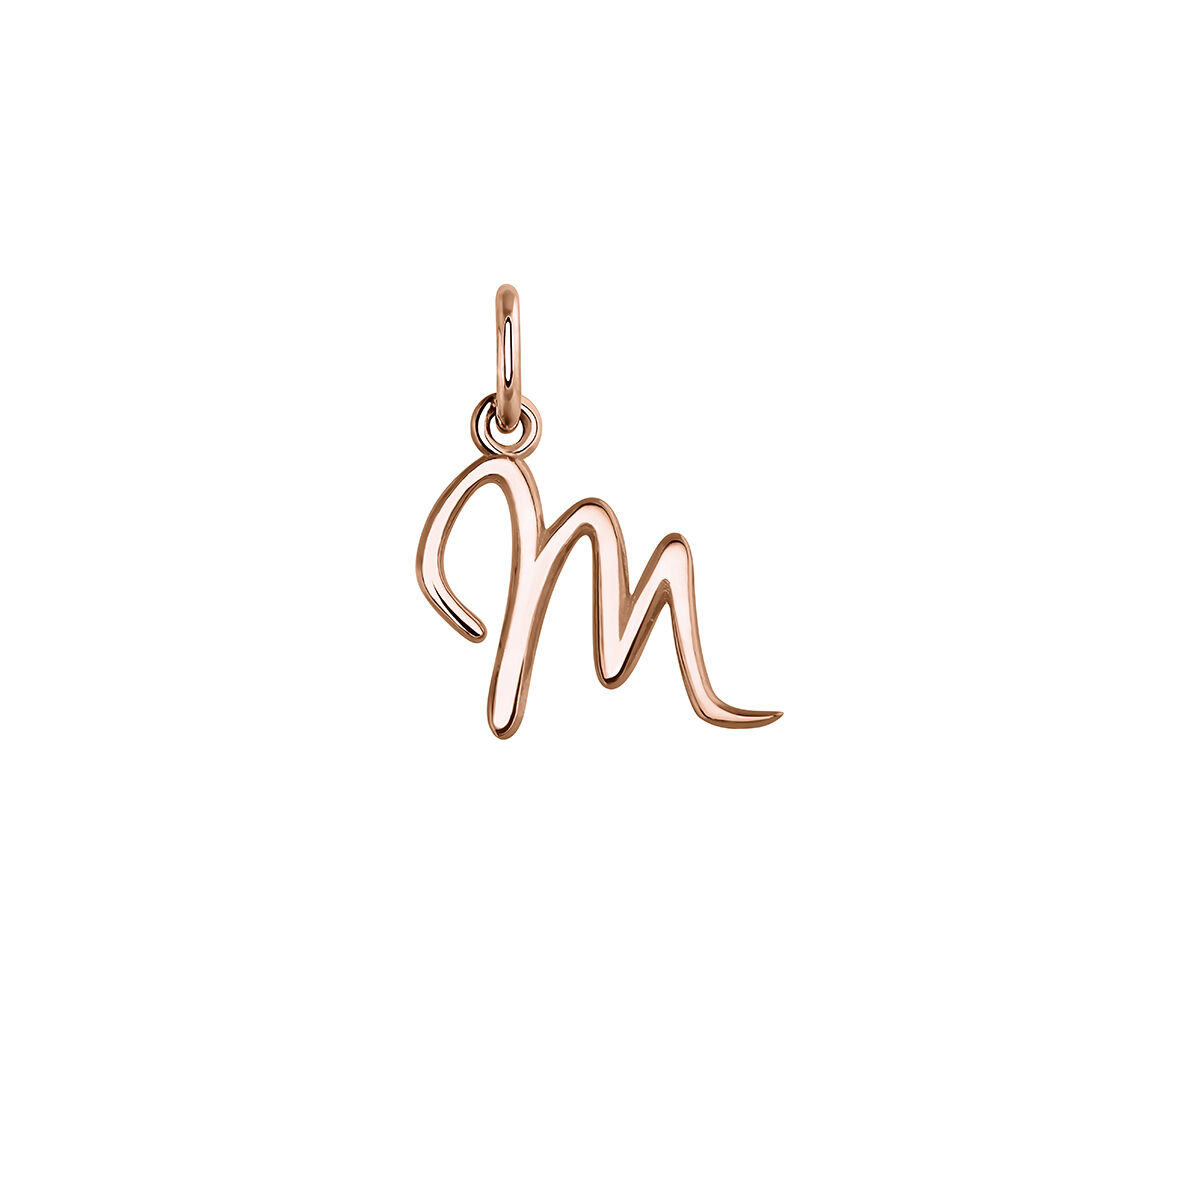 Rose gold-plated silver M initial charm  , J03932-03-M, hi-res